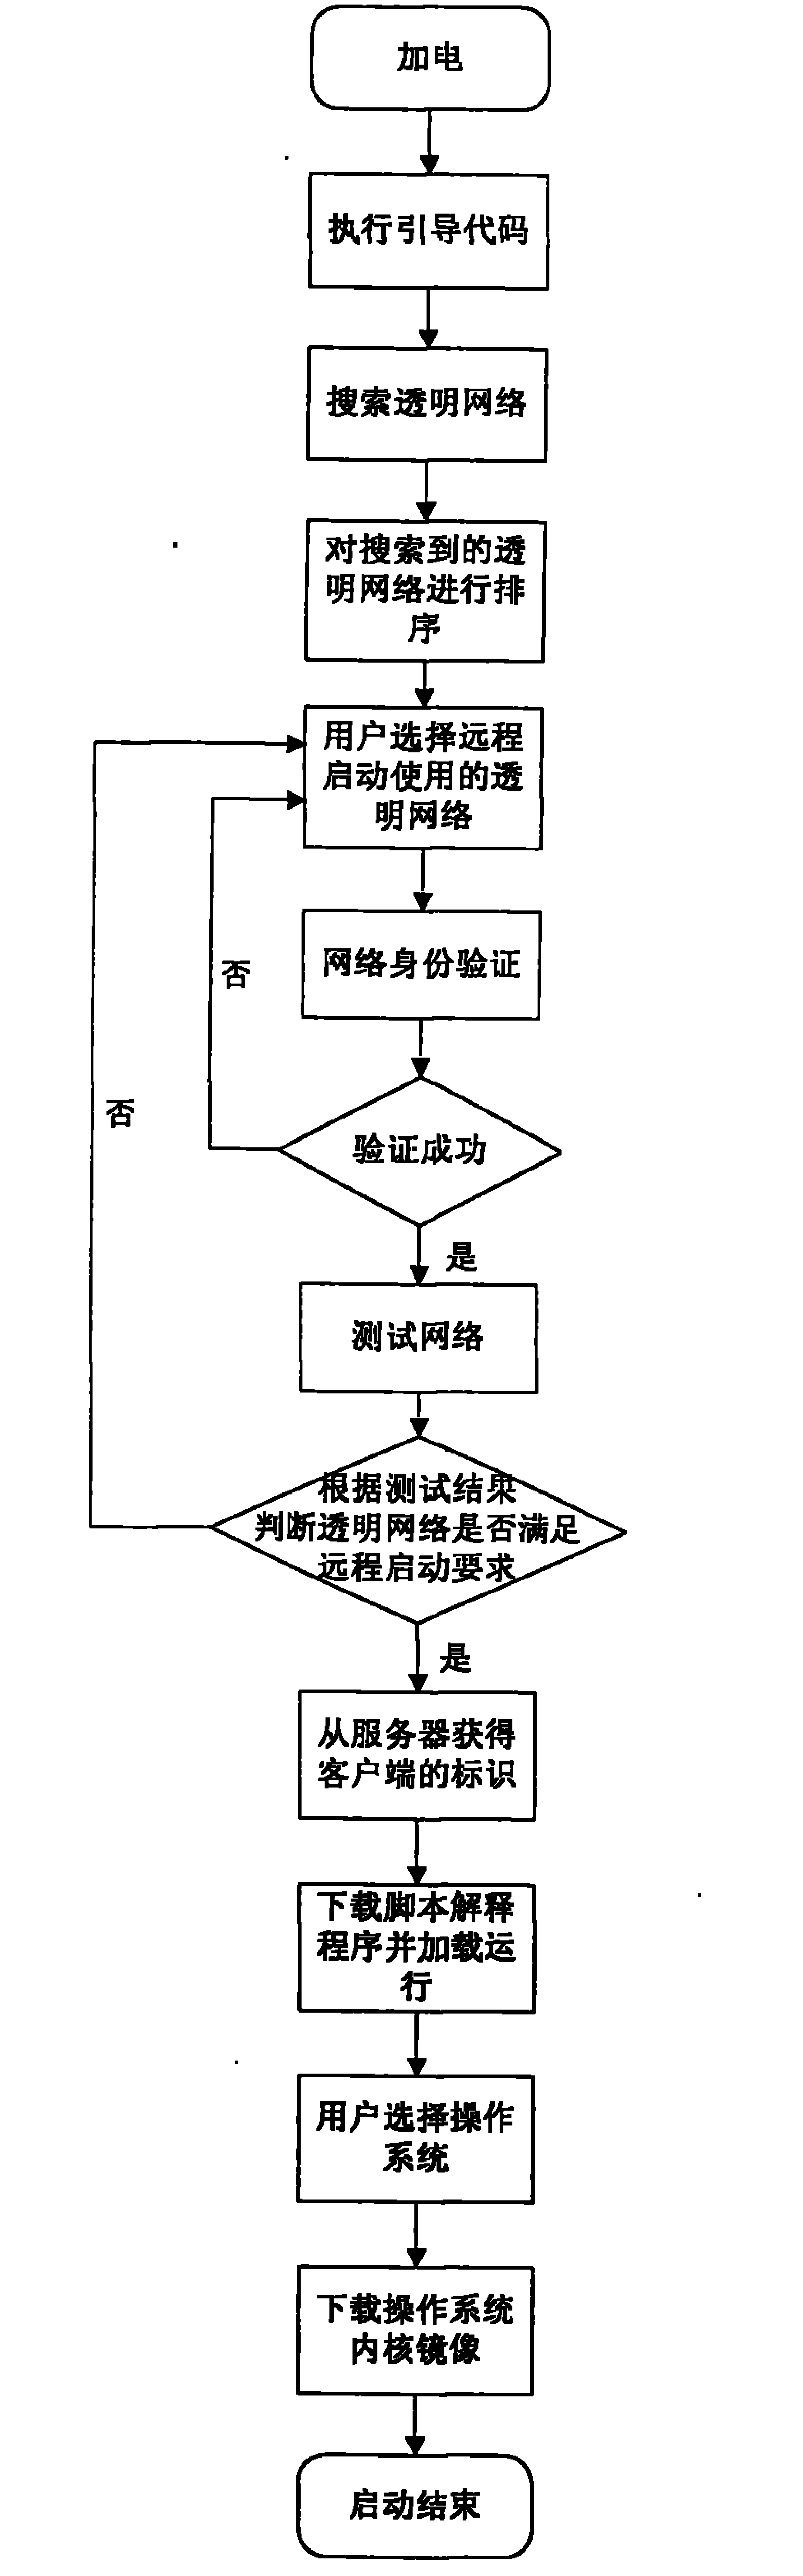 Method for remotely starting transparent computing system client through wireless local area network